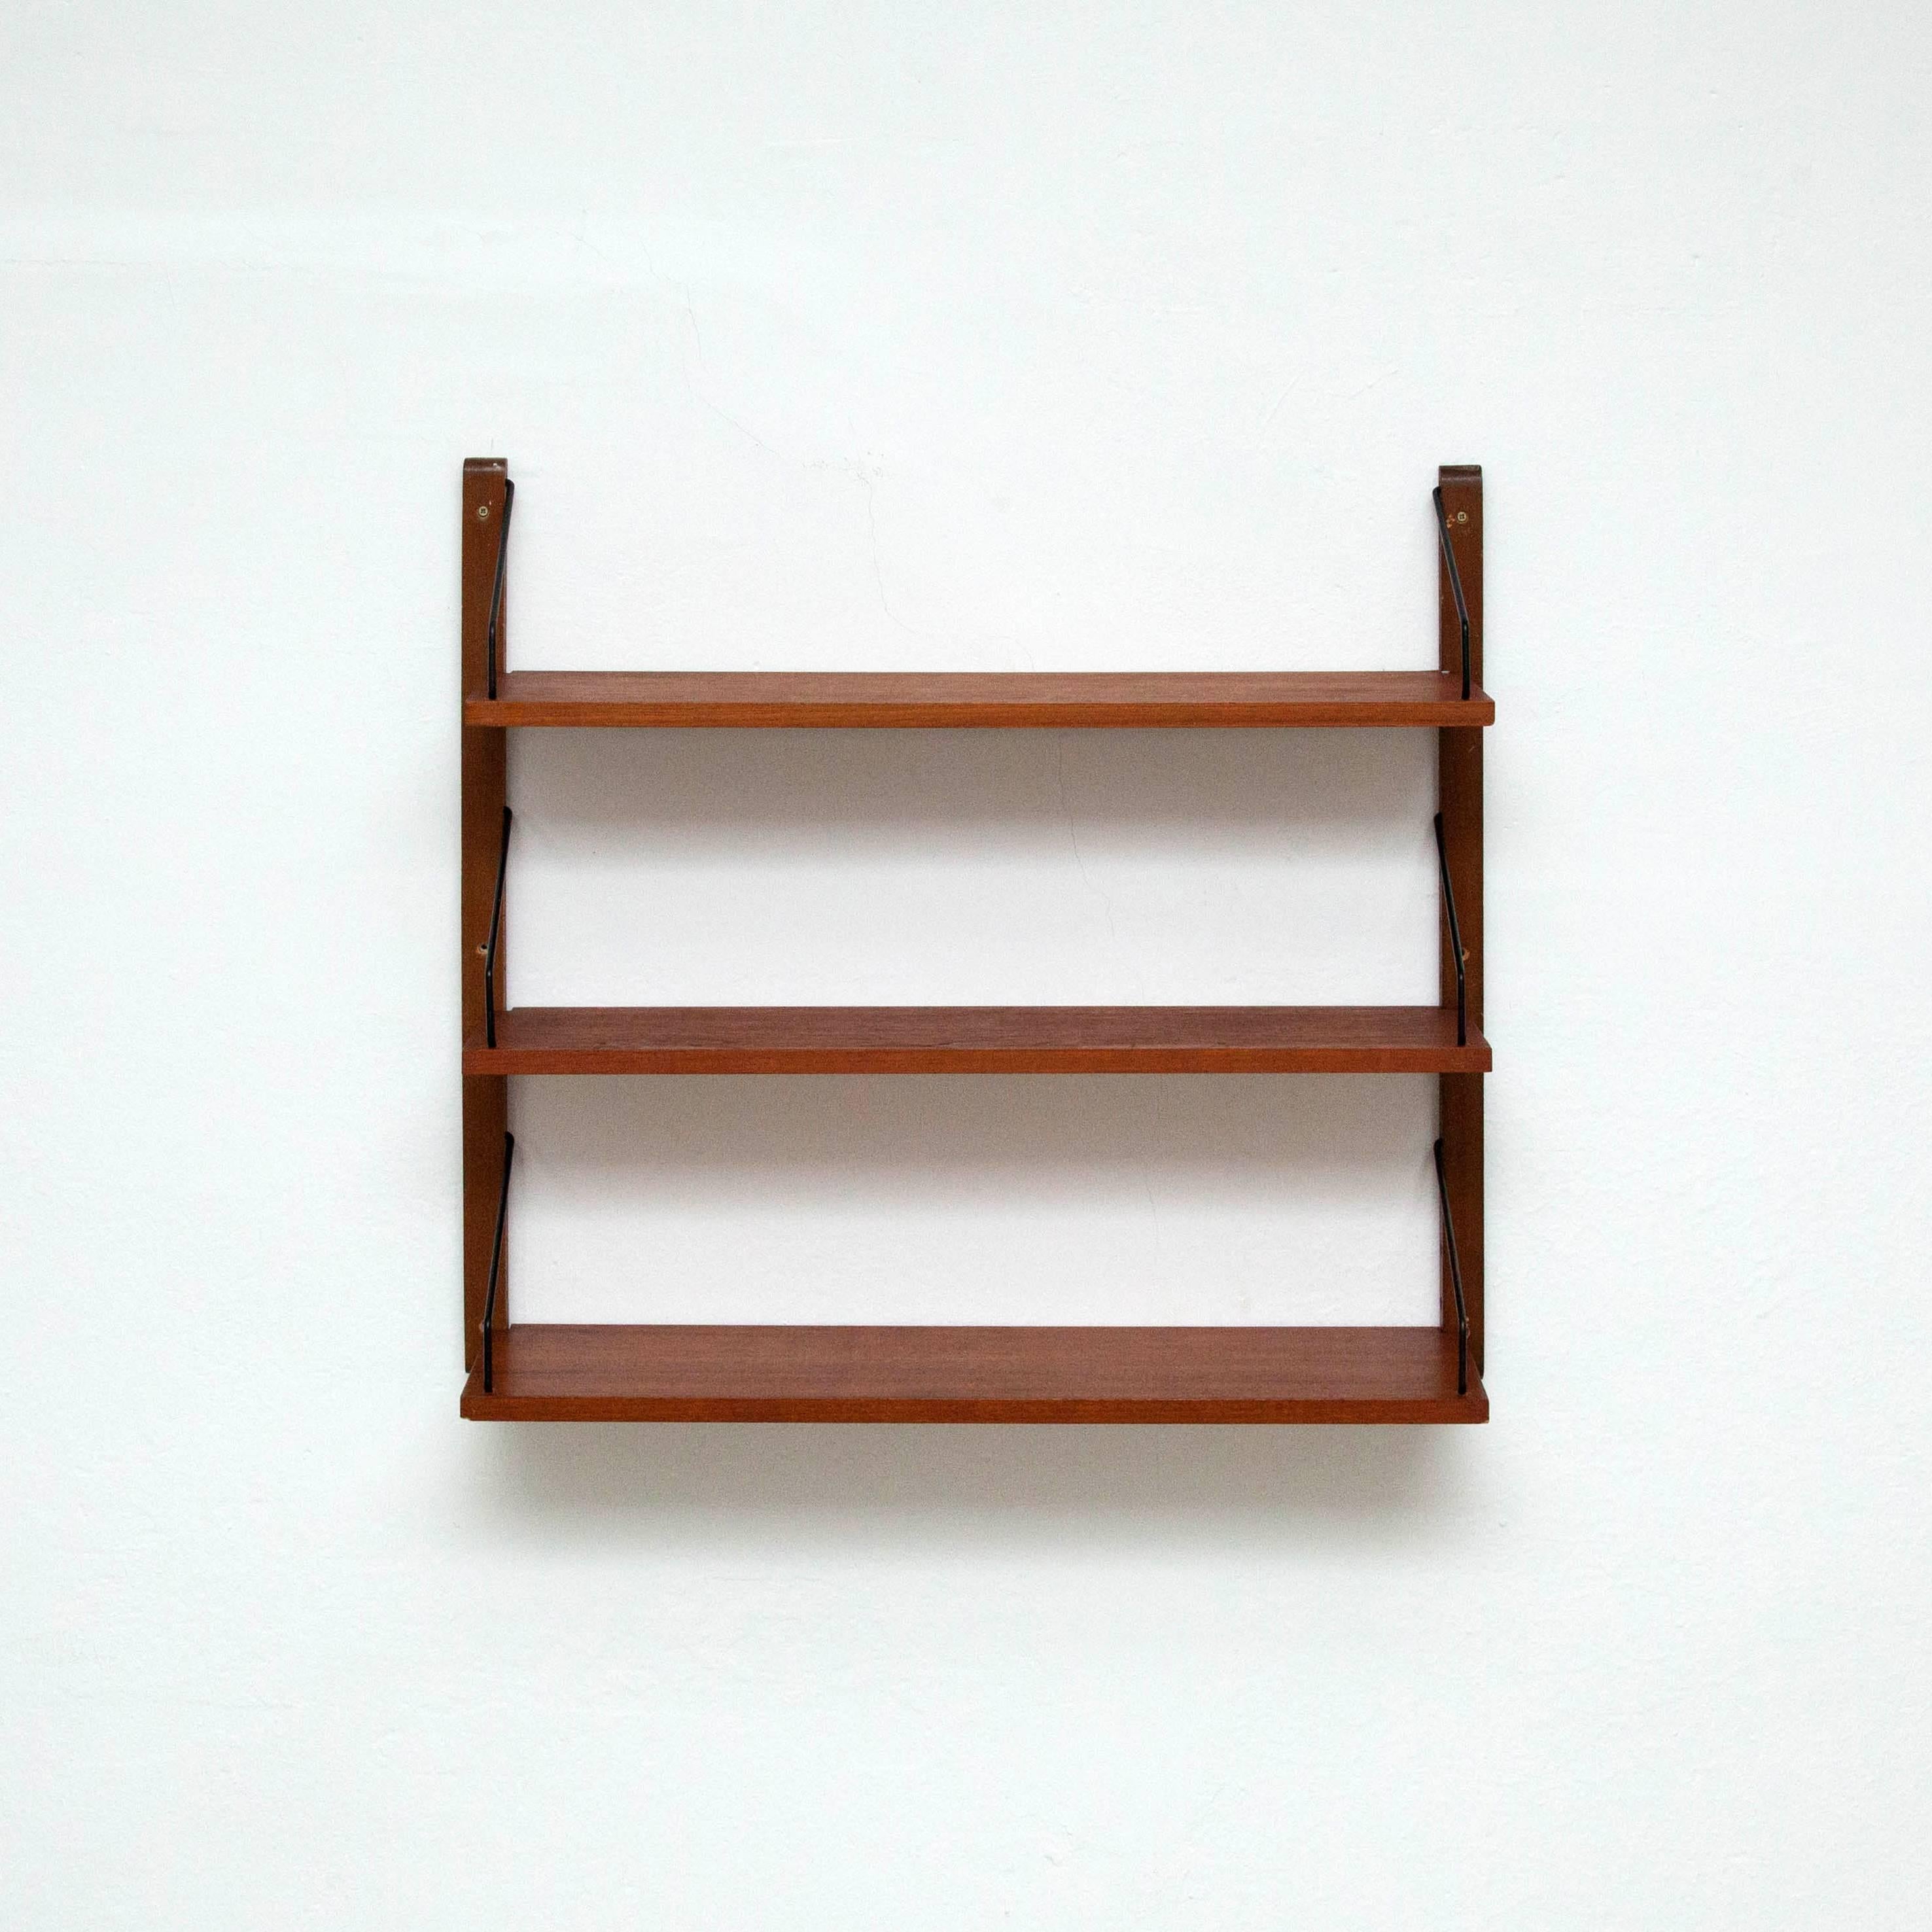 'Royal System' wall shelves system designed by Poul Cadovius, 1948.
Manufactured by Cado in Denmark.

It possible to fit multiple shelves together.

In good original condition with minor wear consistent with age and use, preserving a beautiful